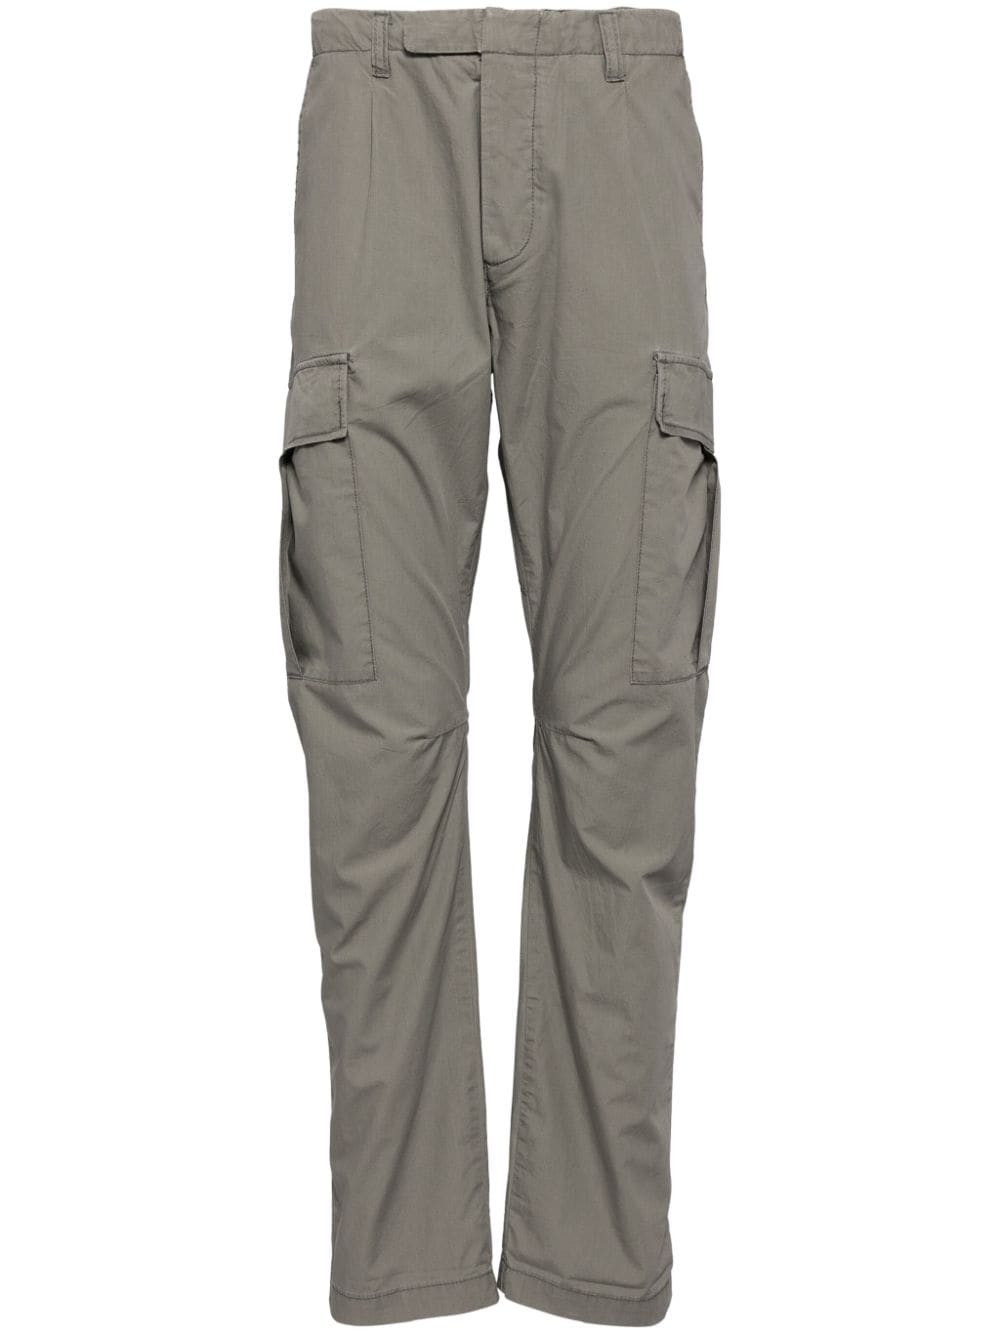 The Patrick cotton cargo trousers